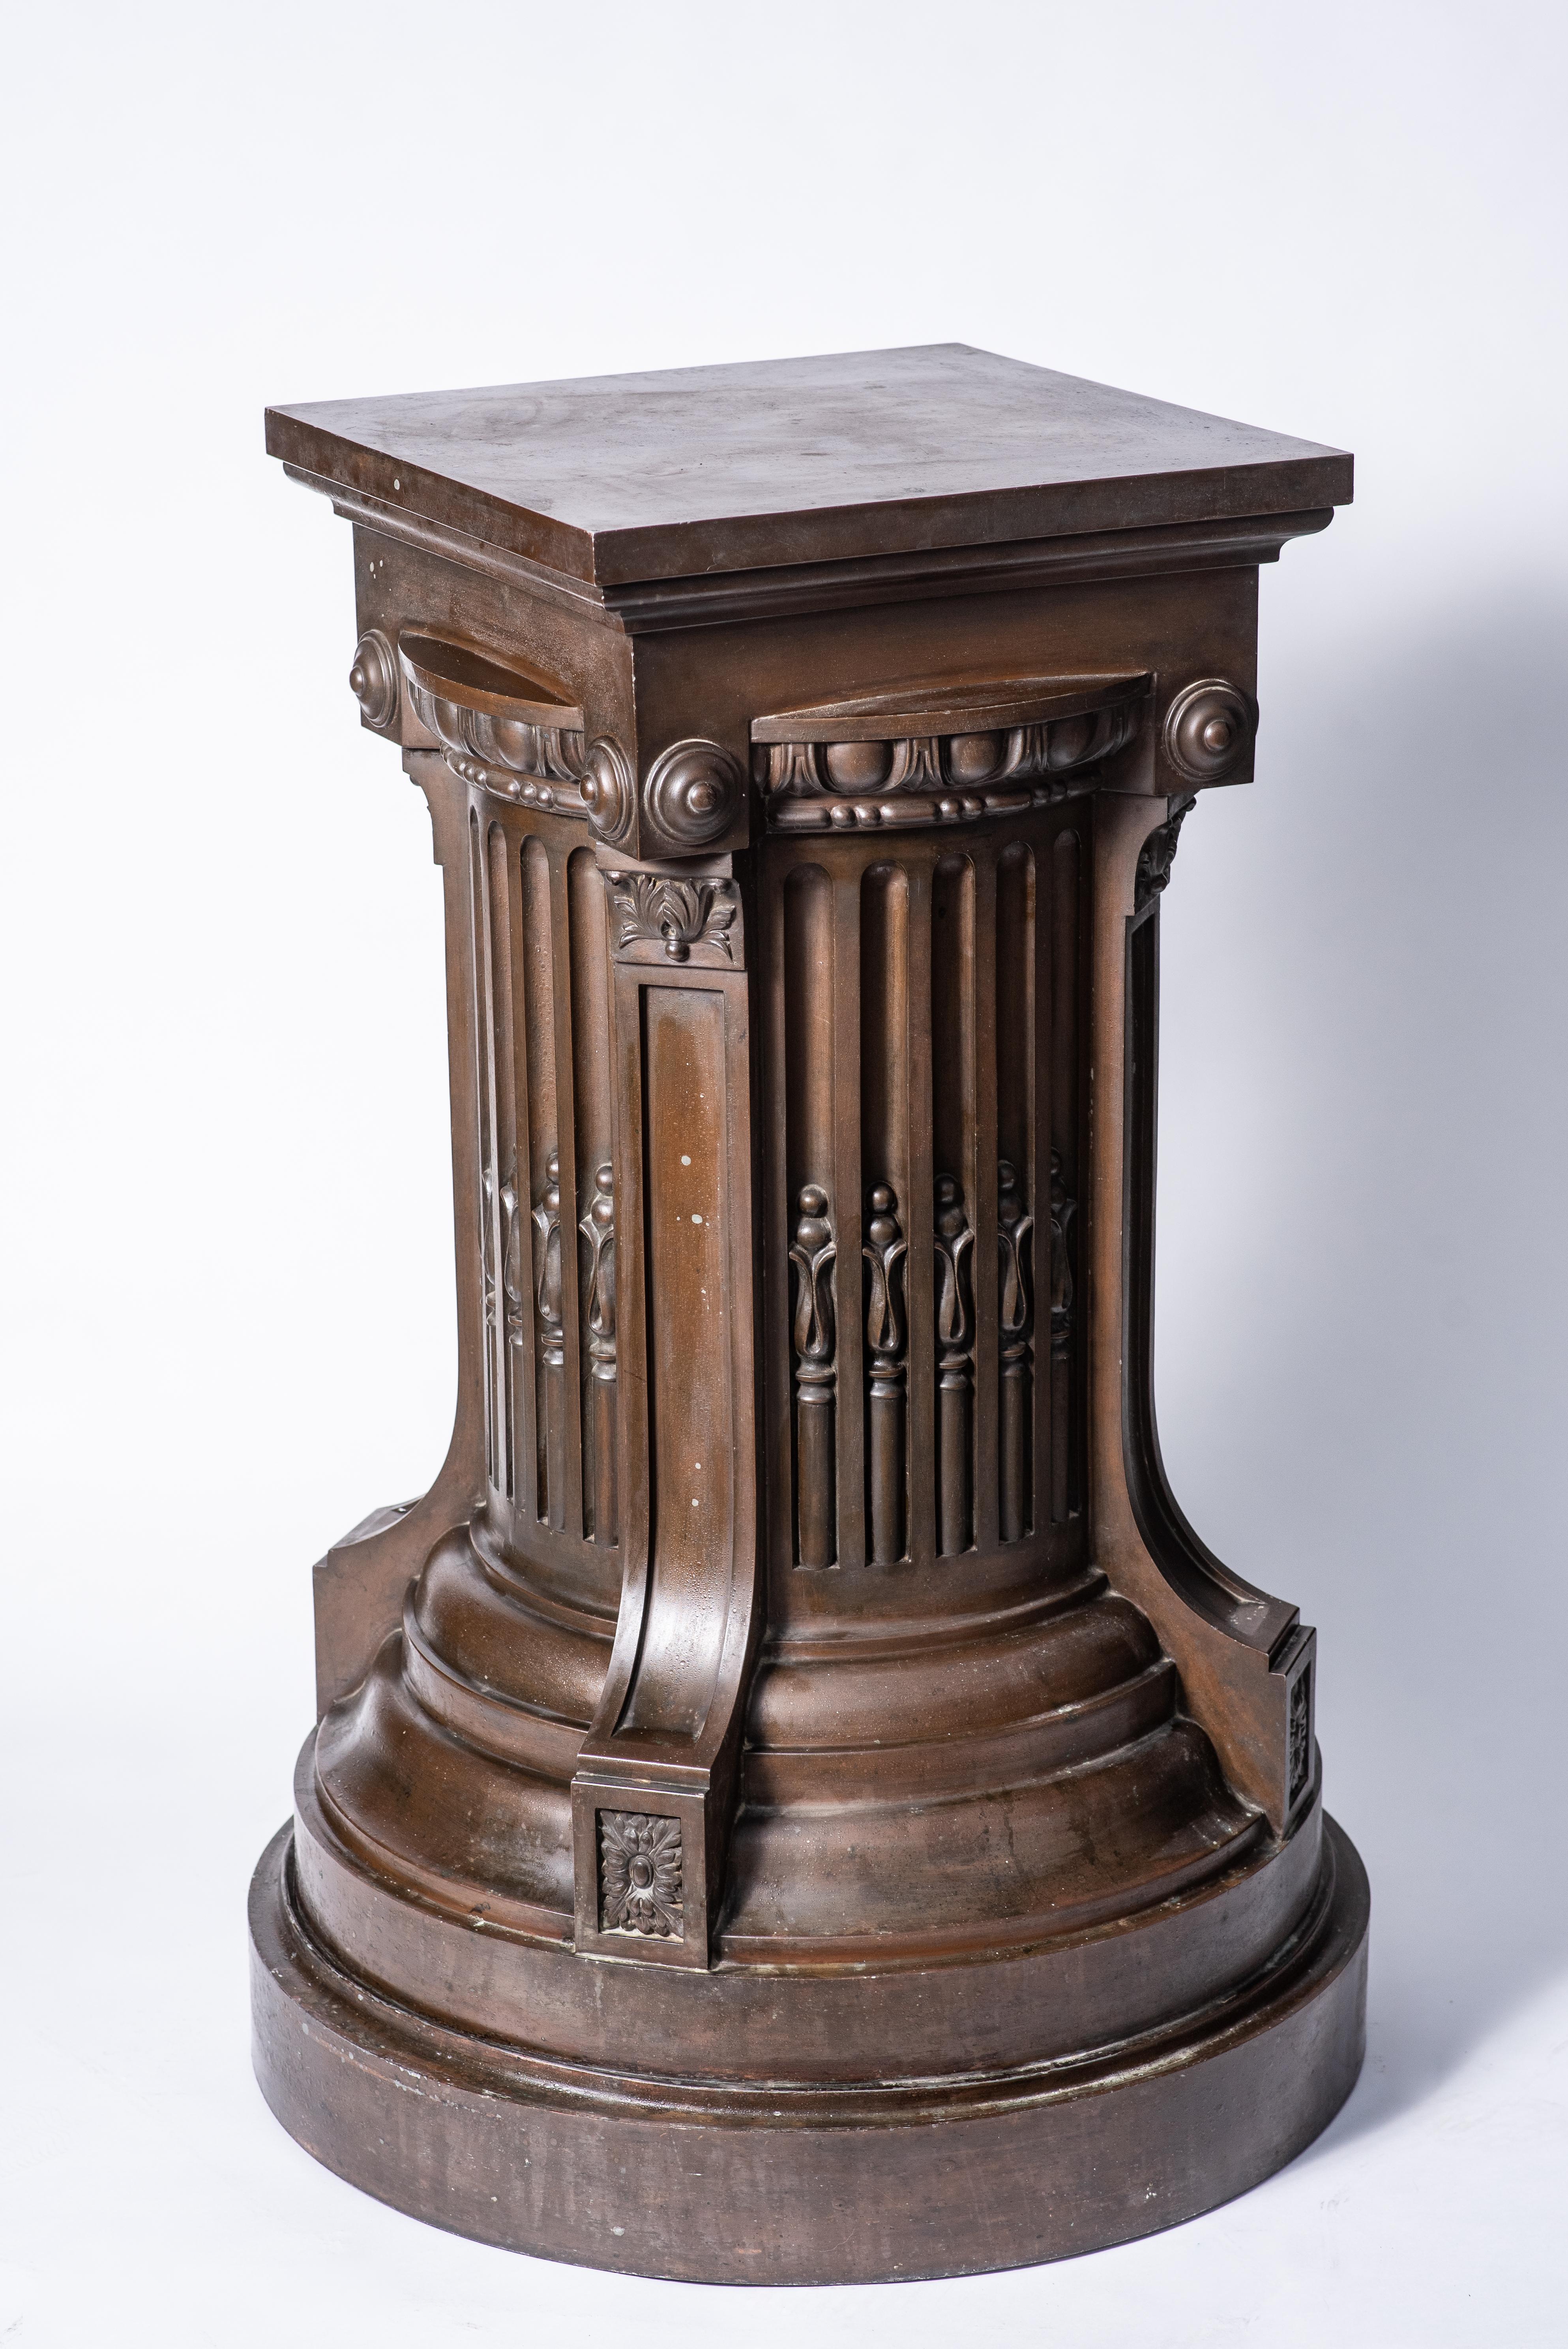 Rare and important stand in the shape of a column, LXVI style, 
in copper-plated and patinated metal. 
Decor of asparagus, scrolls, grooves etc.
It can support a very heavy object.
France circa 1880.

Base: 29.5 in x 29.5 in
Tray: 19.7 x 19.7